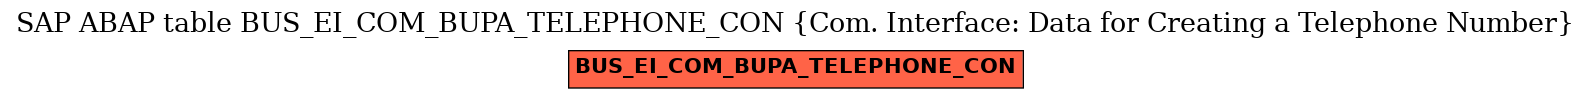 E-R Diagram for table BUS_EI_COM_BUPA_TELEPHONE_CON (Com. Interface: Data for Creating a Telephone Number)